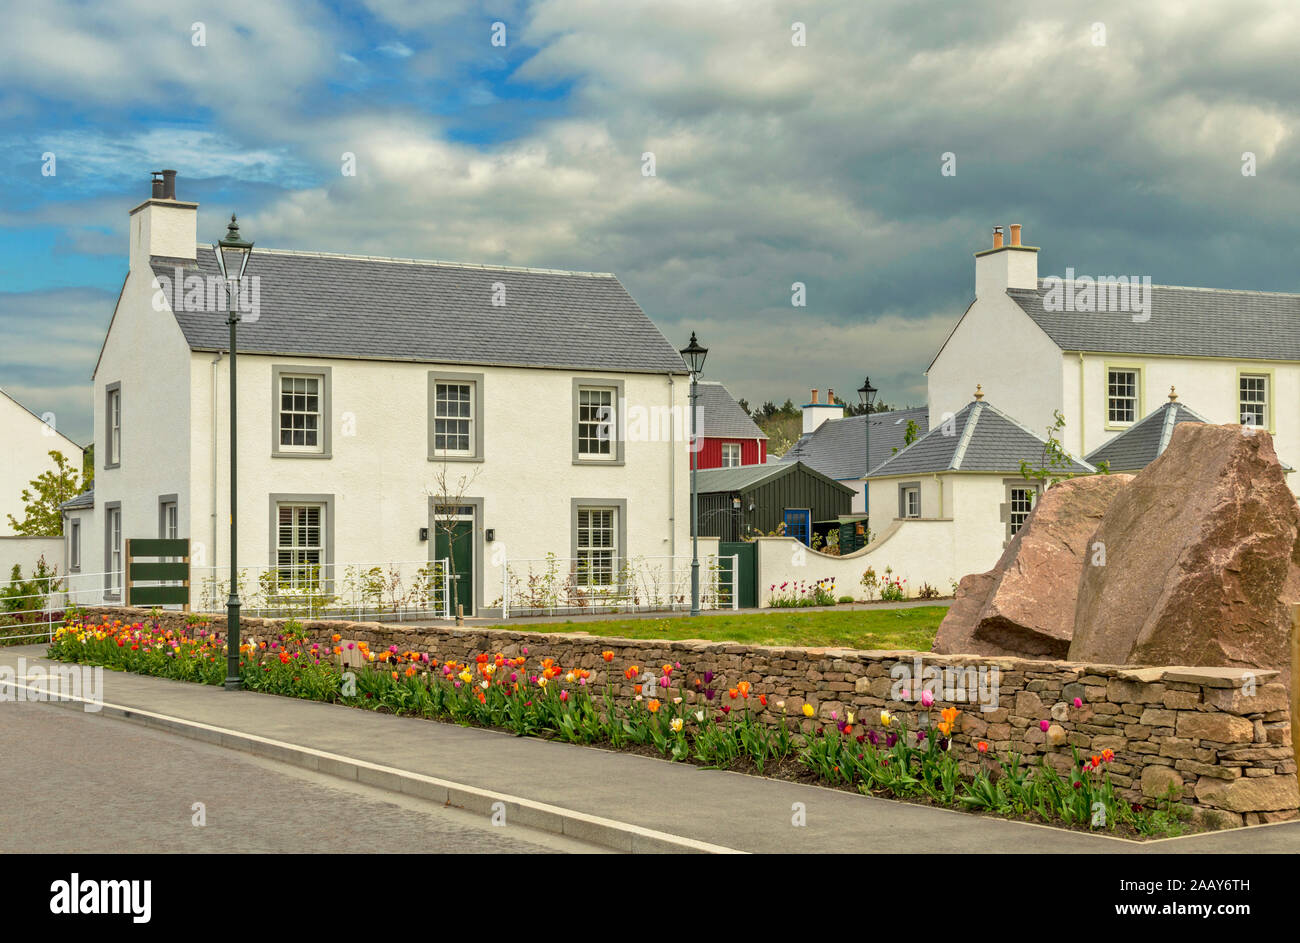 TORNAGRAIN INVERNESS SCOTLAND THE PLANNED HAMLET OR VILLAGE A HOUSE WITH STONE WALL AND A BED OF COLOURFUL TULIPS Stock Photo